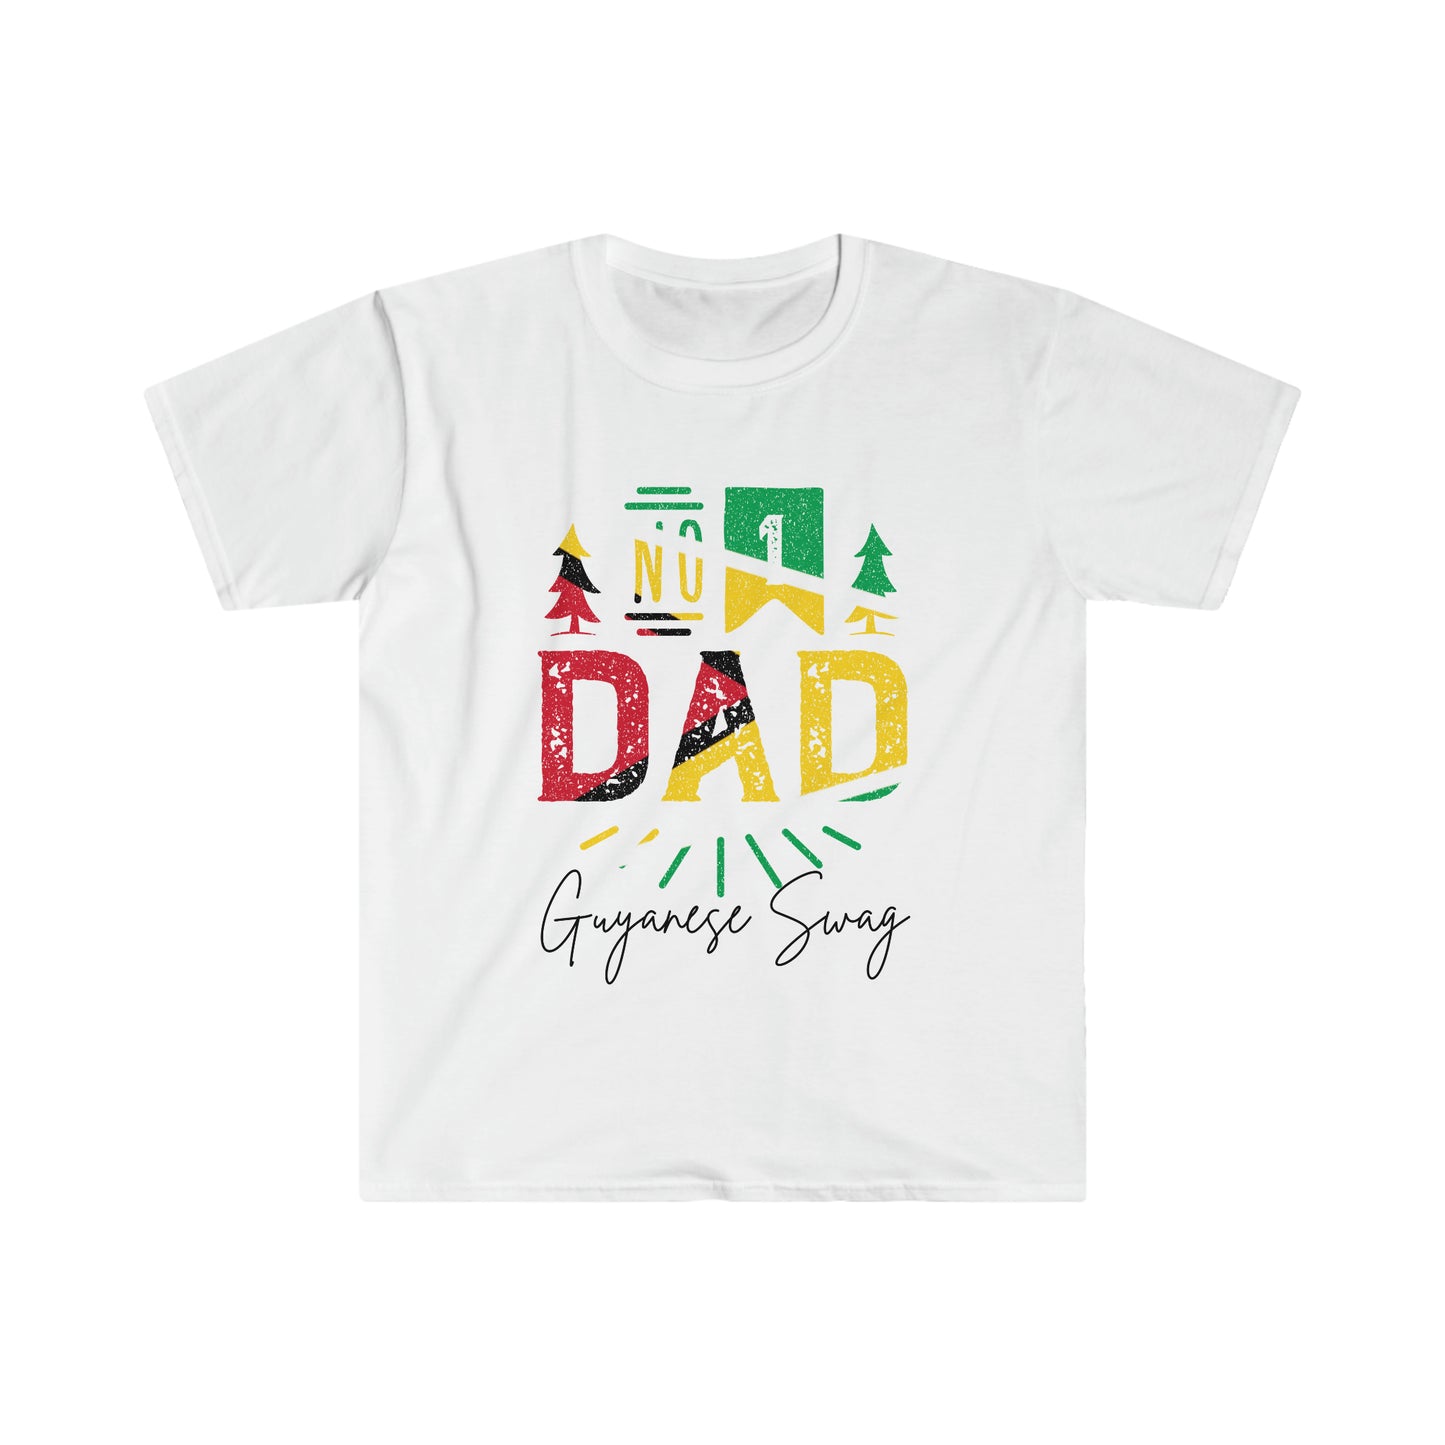 Father's Day Number 1 Dad Soft Style Shirt Sleeve T-Shirt by Guyanese Swag.